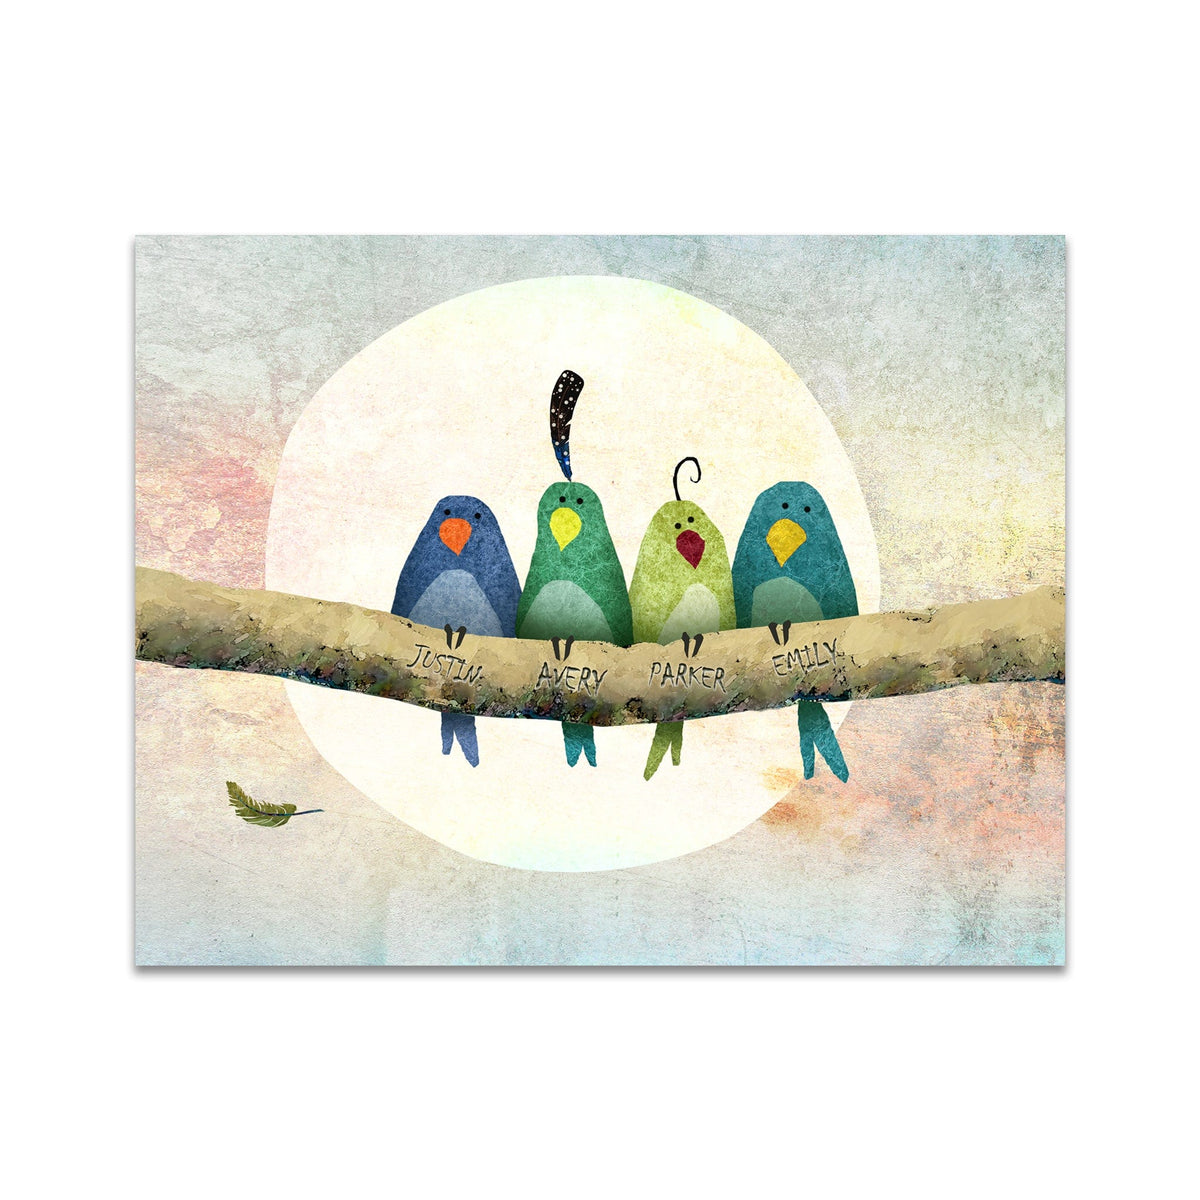 Personalized bird family art sign from Personal Prints